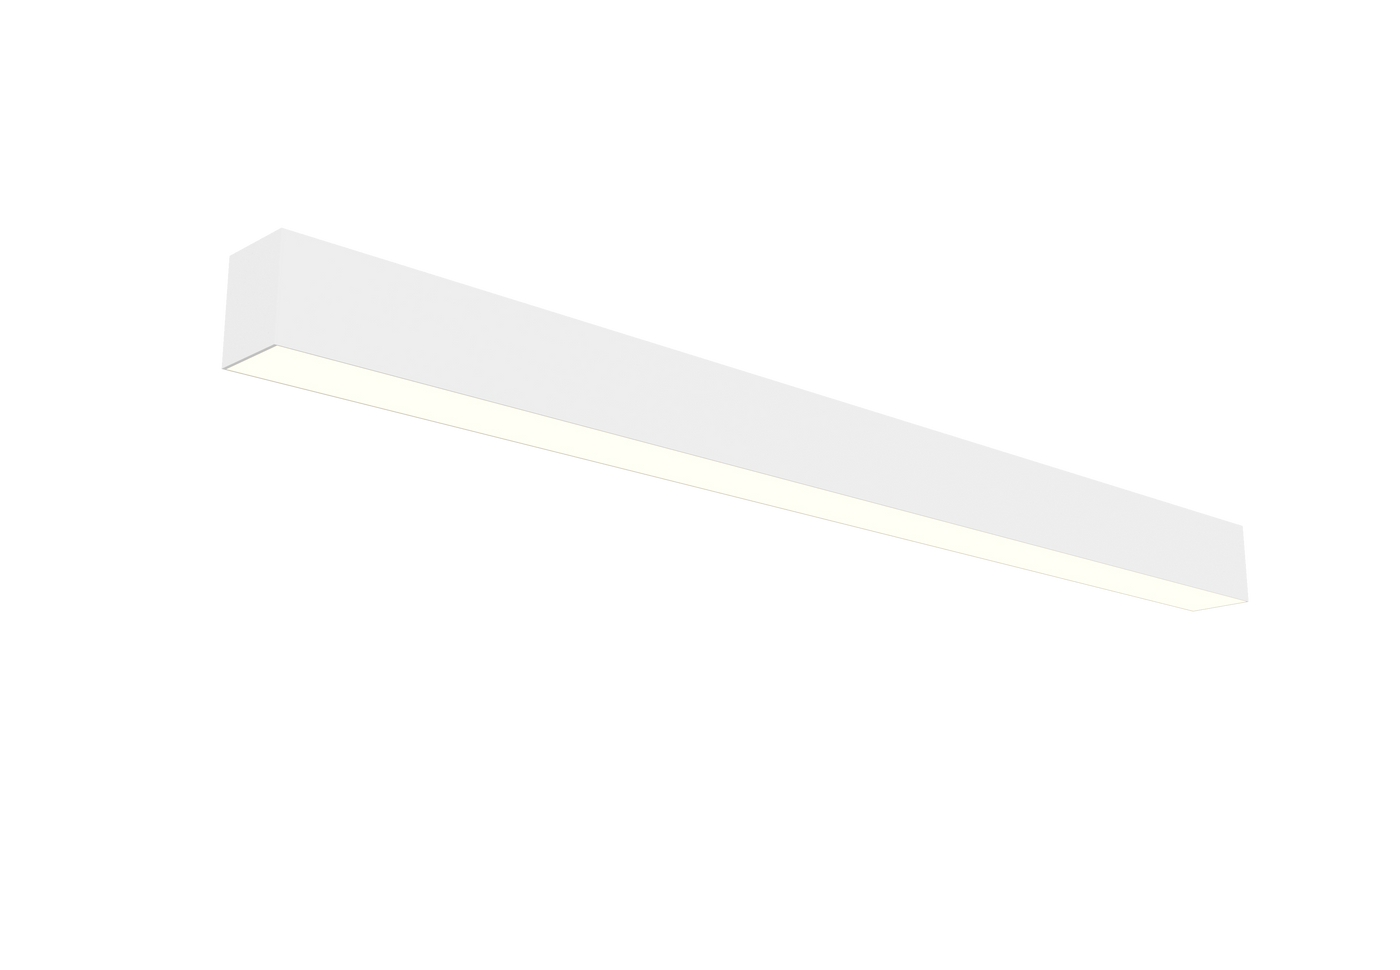 8 FT LED Linear Fixture G2, 9600 Lumen Max, 80W, CCT Selectable, 120-277V, Black, White or Silver Finish